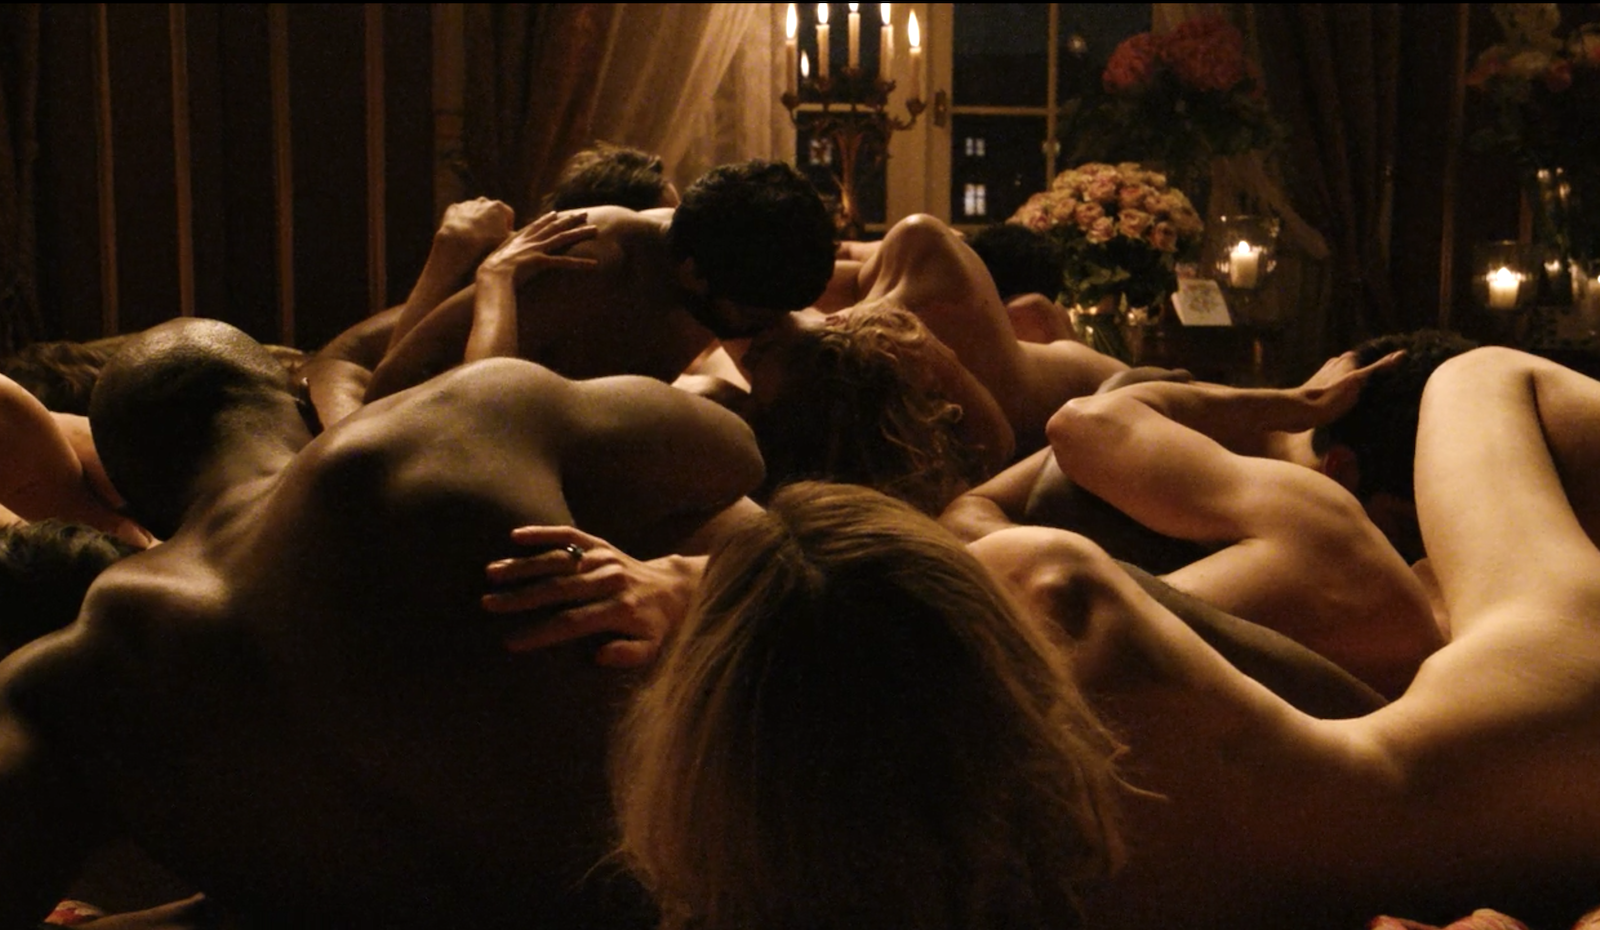 And of course, this orgy scene in the season finale of. 